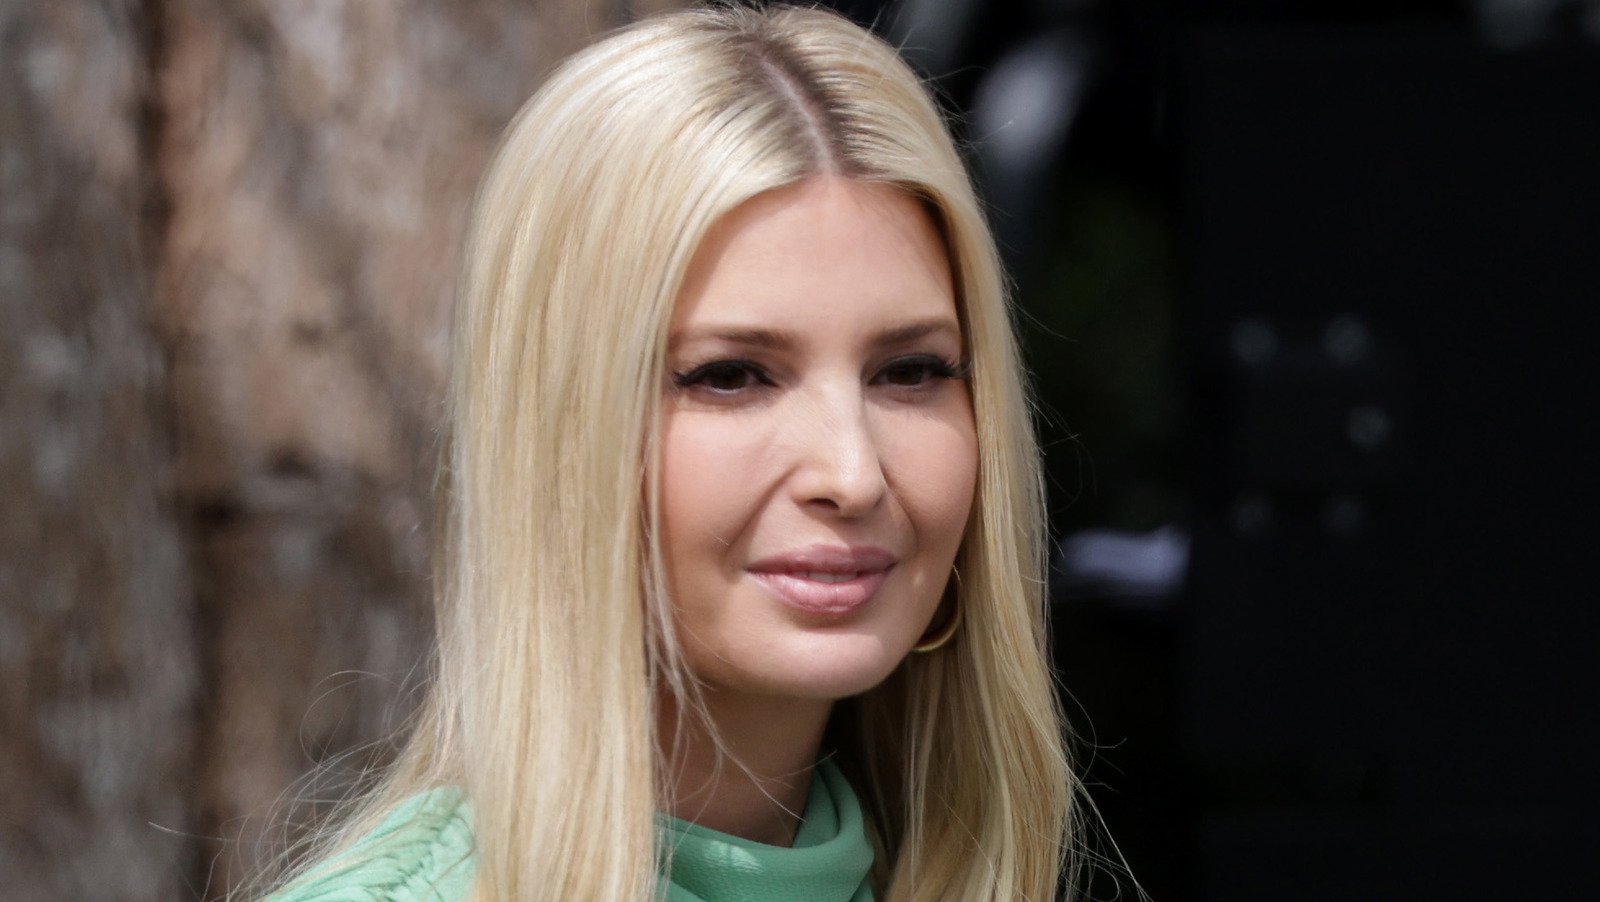 The Best And Worst Days Of Ivanka Trump's Life - The List